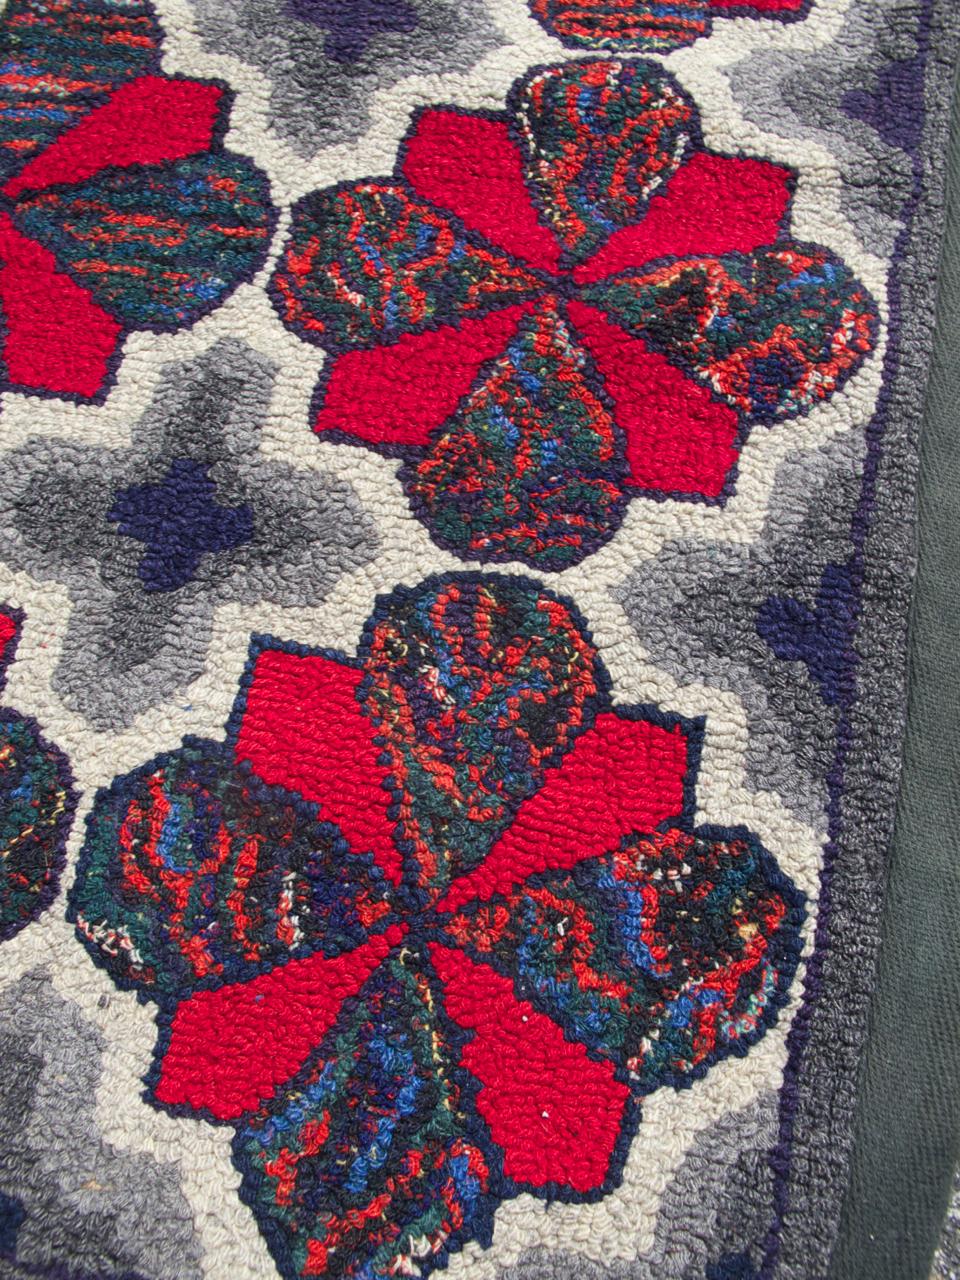 American Hooked Rug, Early 20th Century

Additional Information:
Dimensions: 3'2